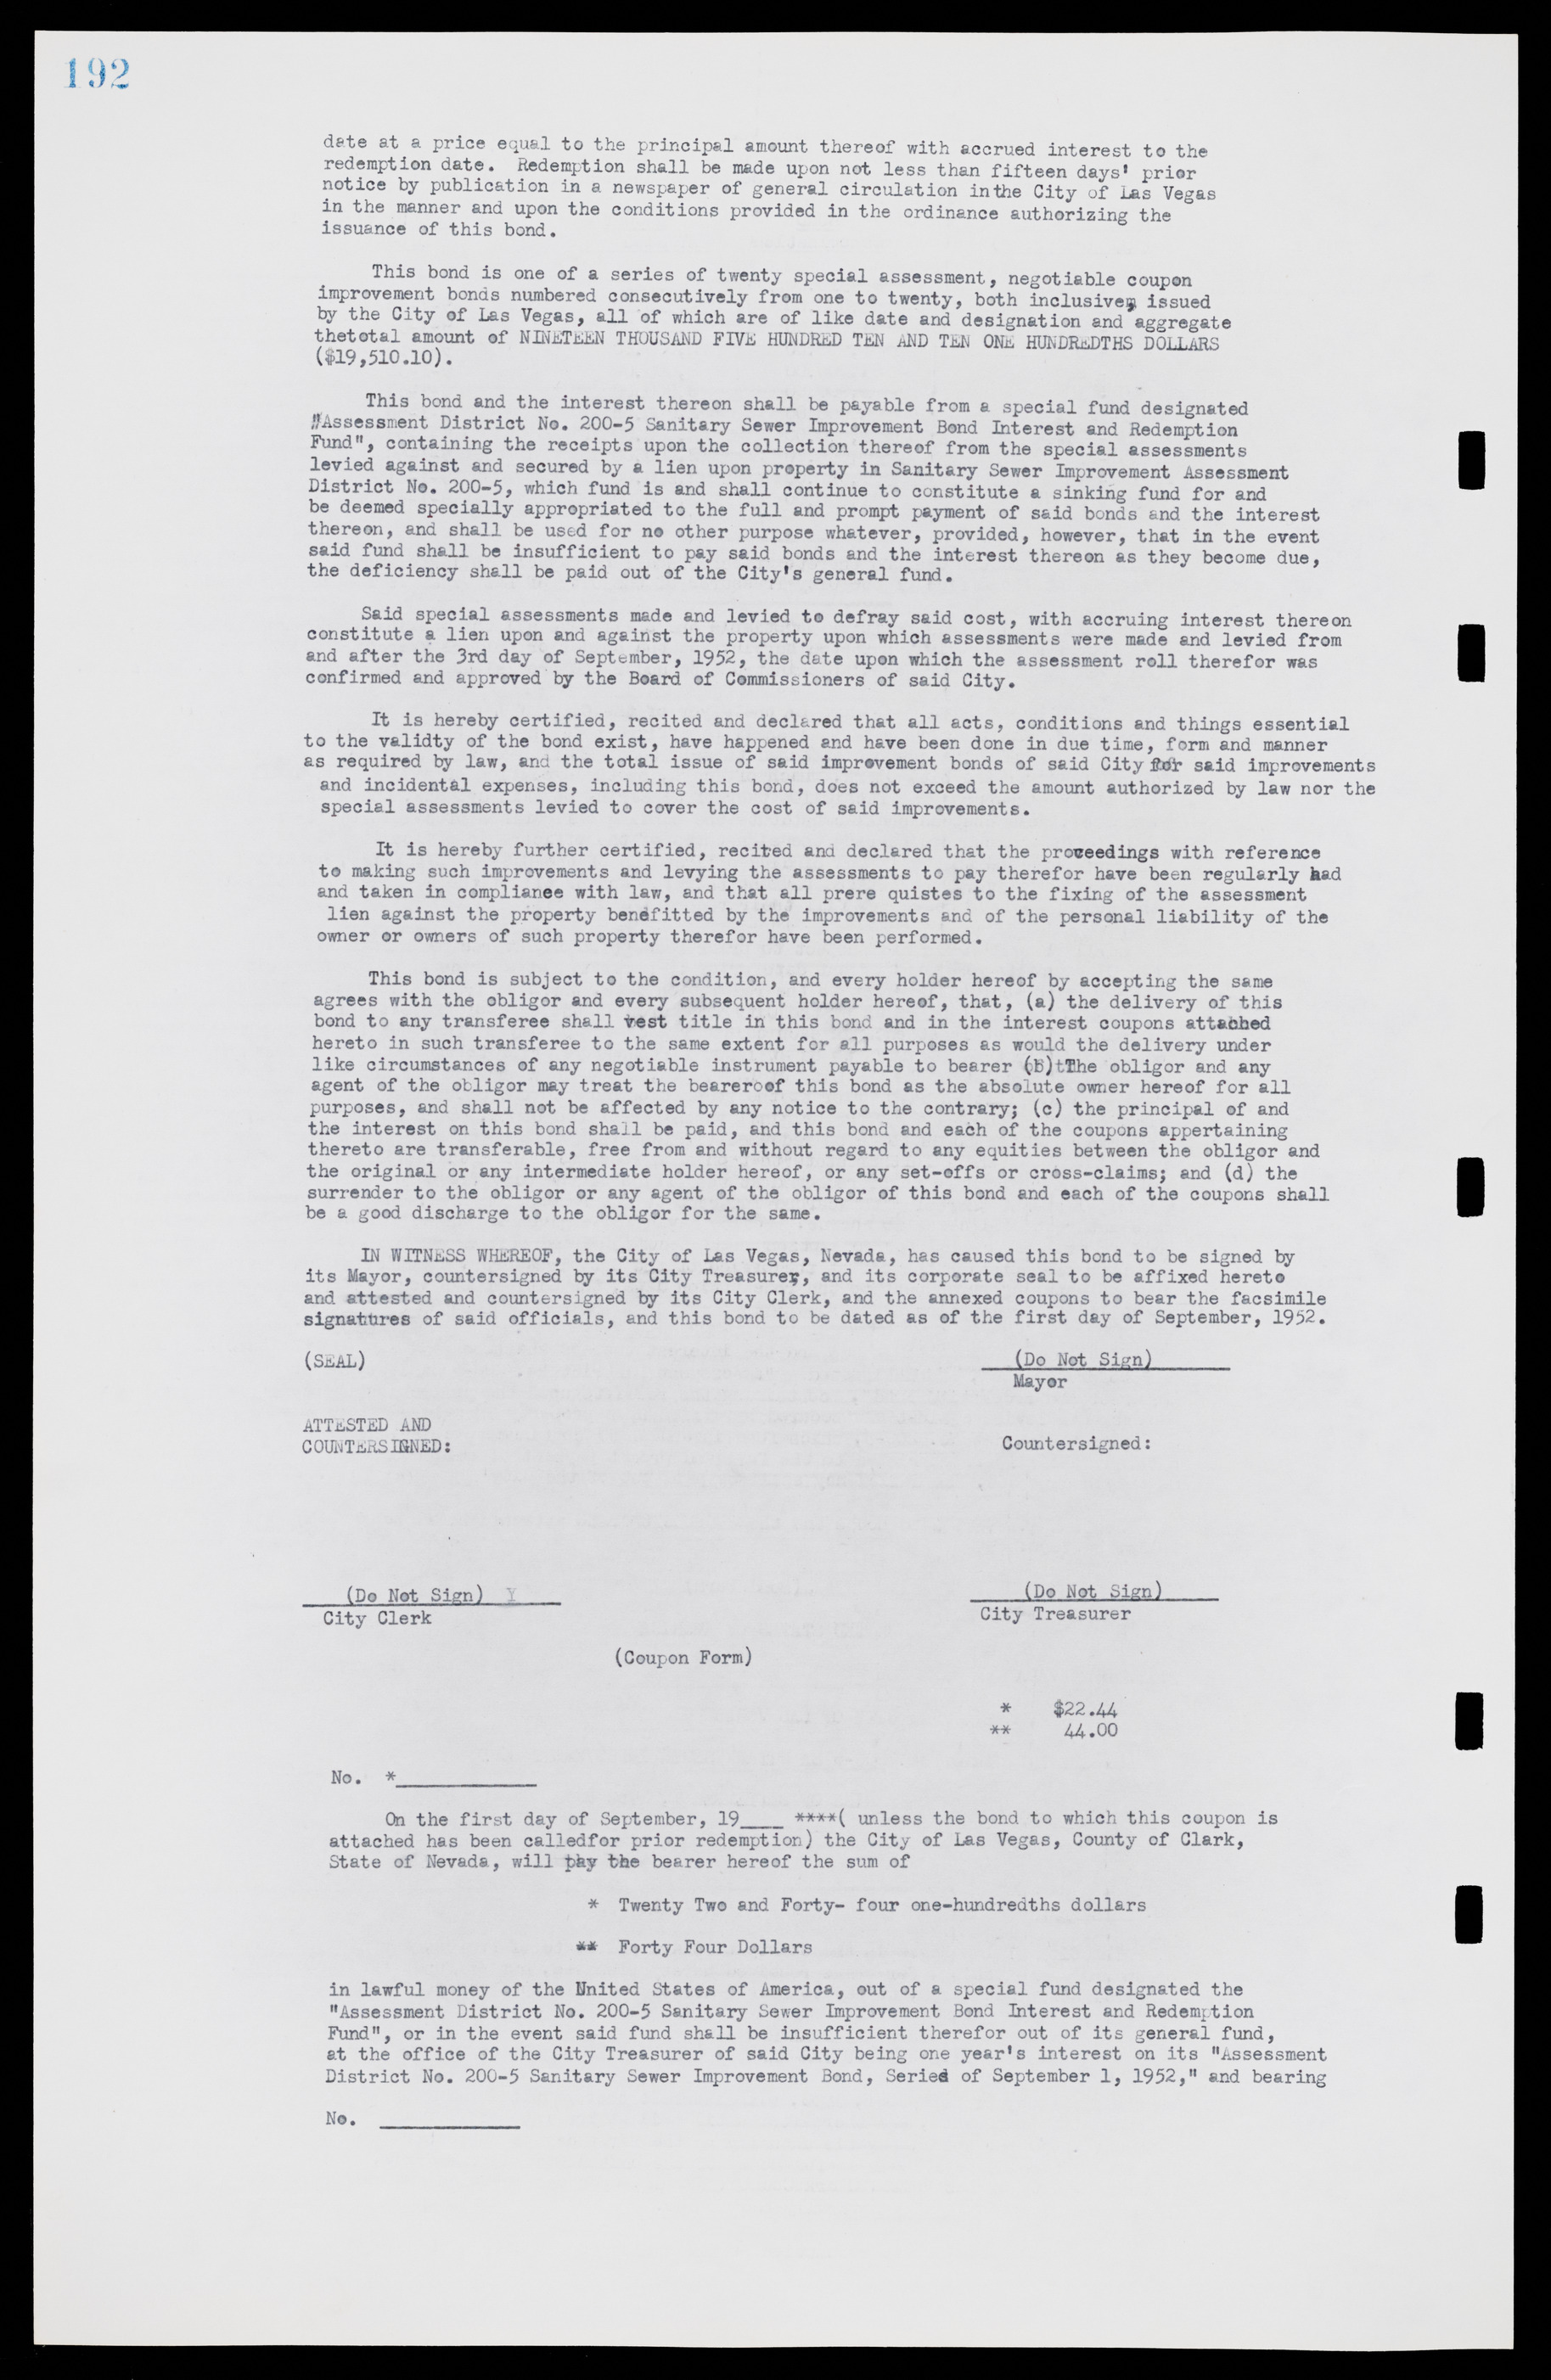 Las Vegas City Commission Minutes, May 26, 1952 to February 17, 1954, lvc000008-206